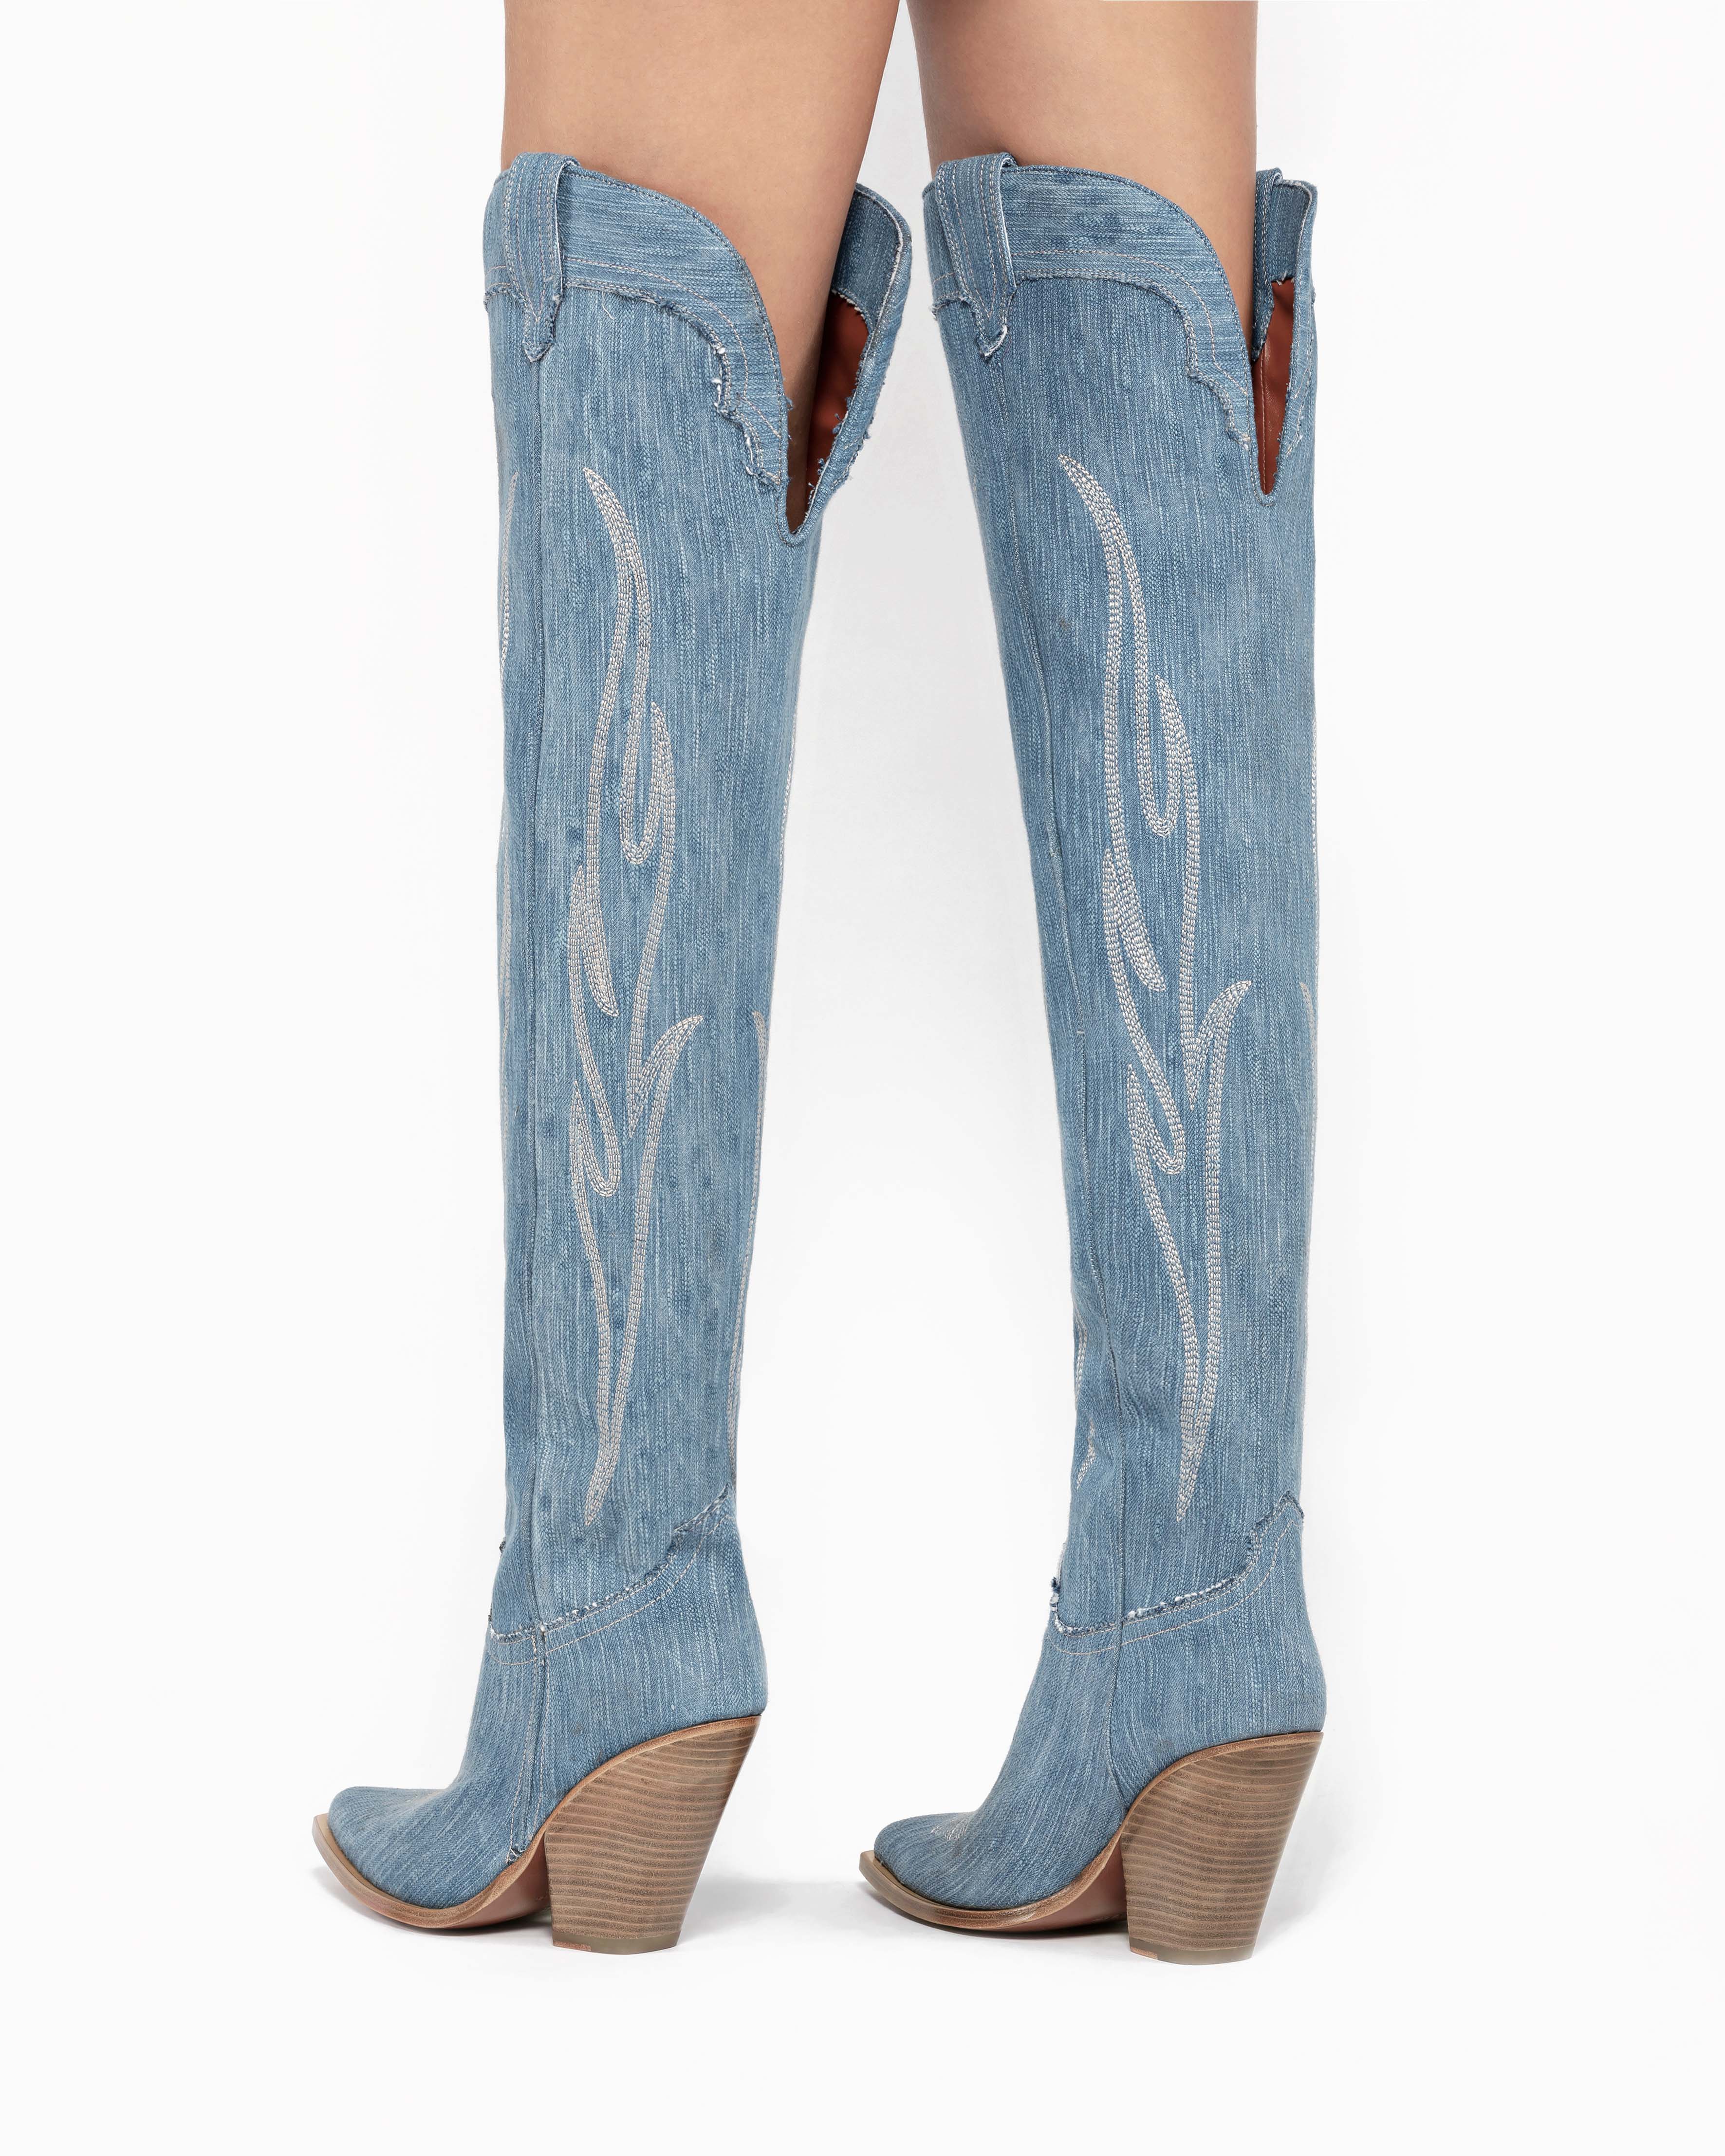 HERMOSA Women's Over The Knee Boots in Light Blue Jeans | Off-White Embroidery_Indossato_03